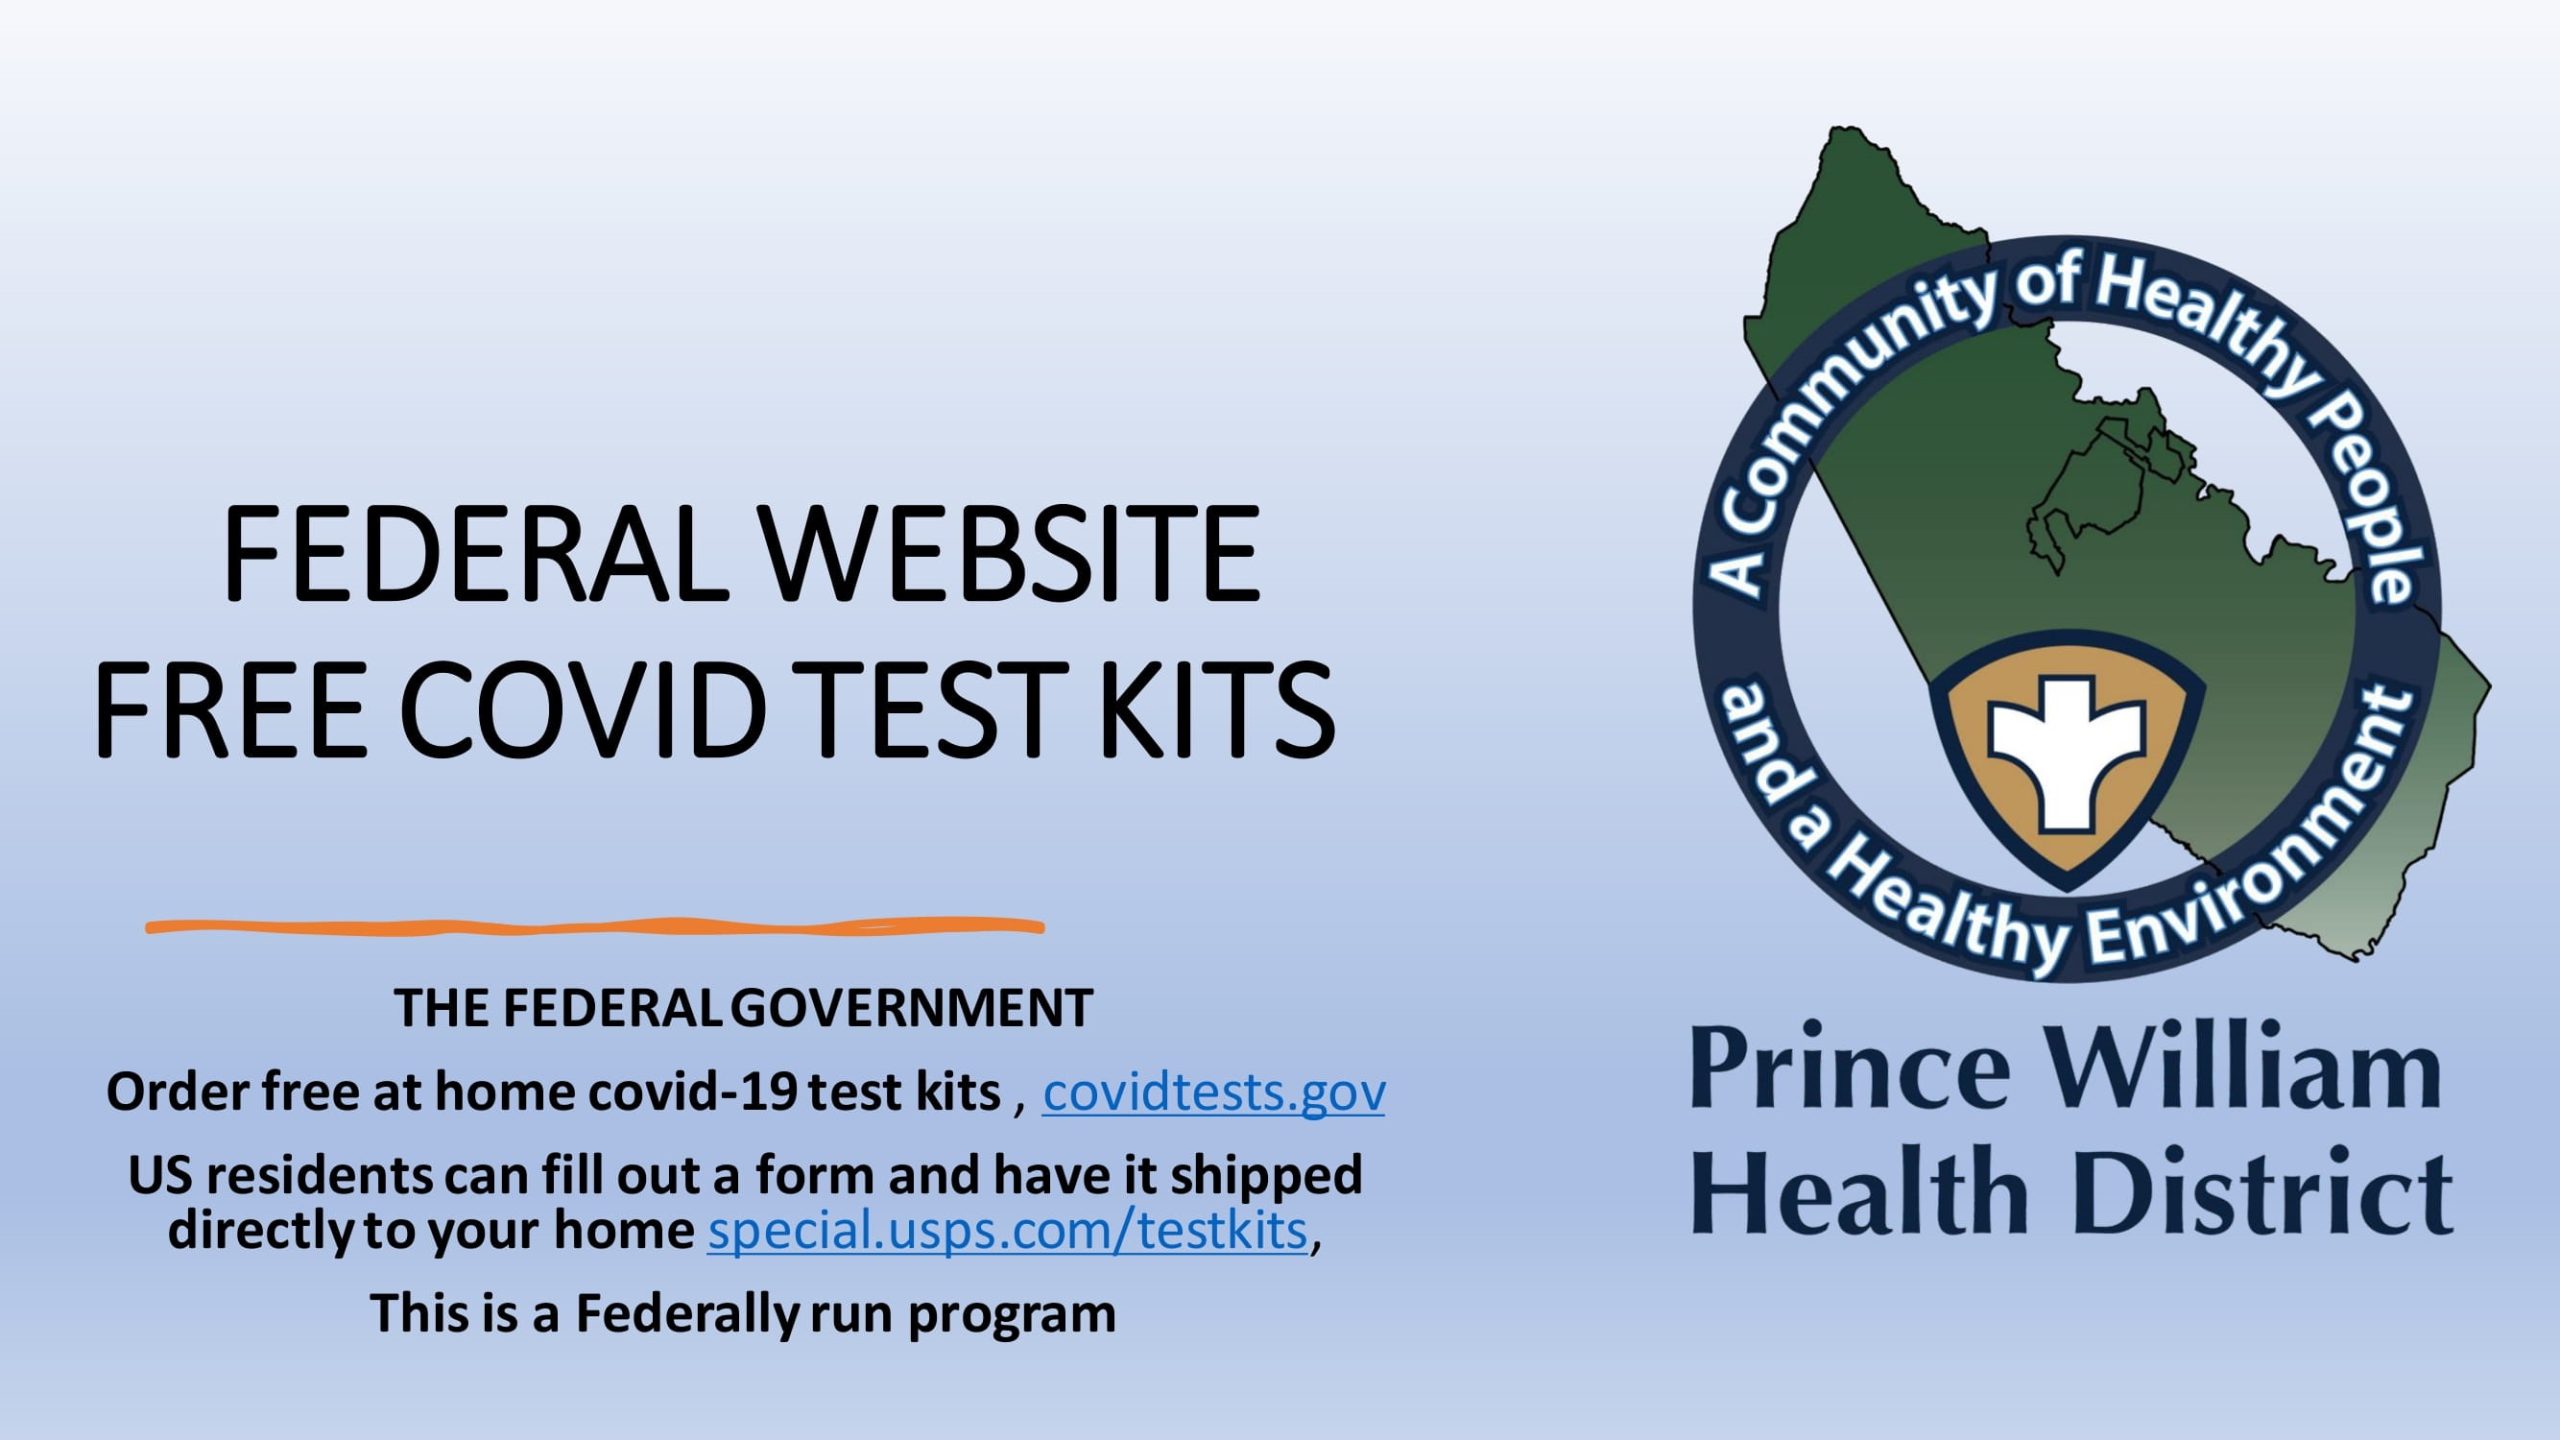 Flyer about federal government's website for free at home covid-19 covid test kits at covidtests.gov. US residents can fill out form to have tests shipped to home at special.usps.com/testkits